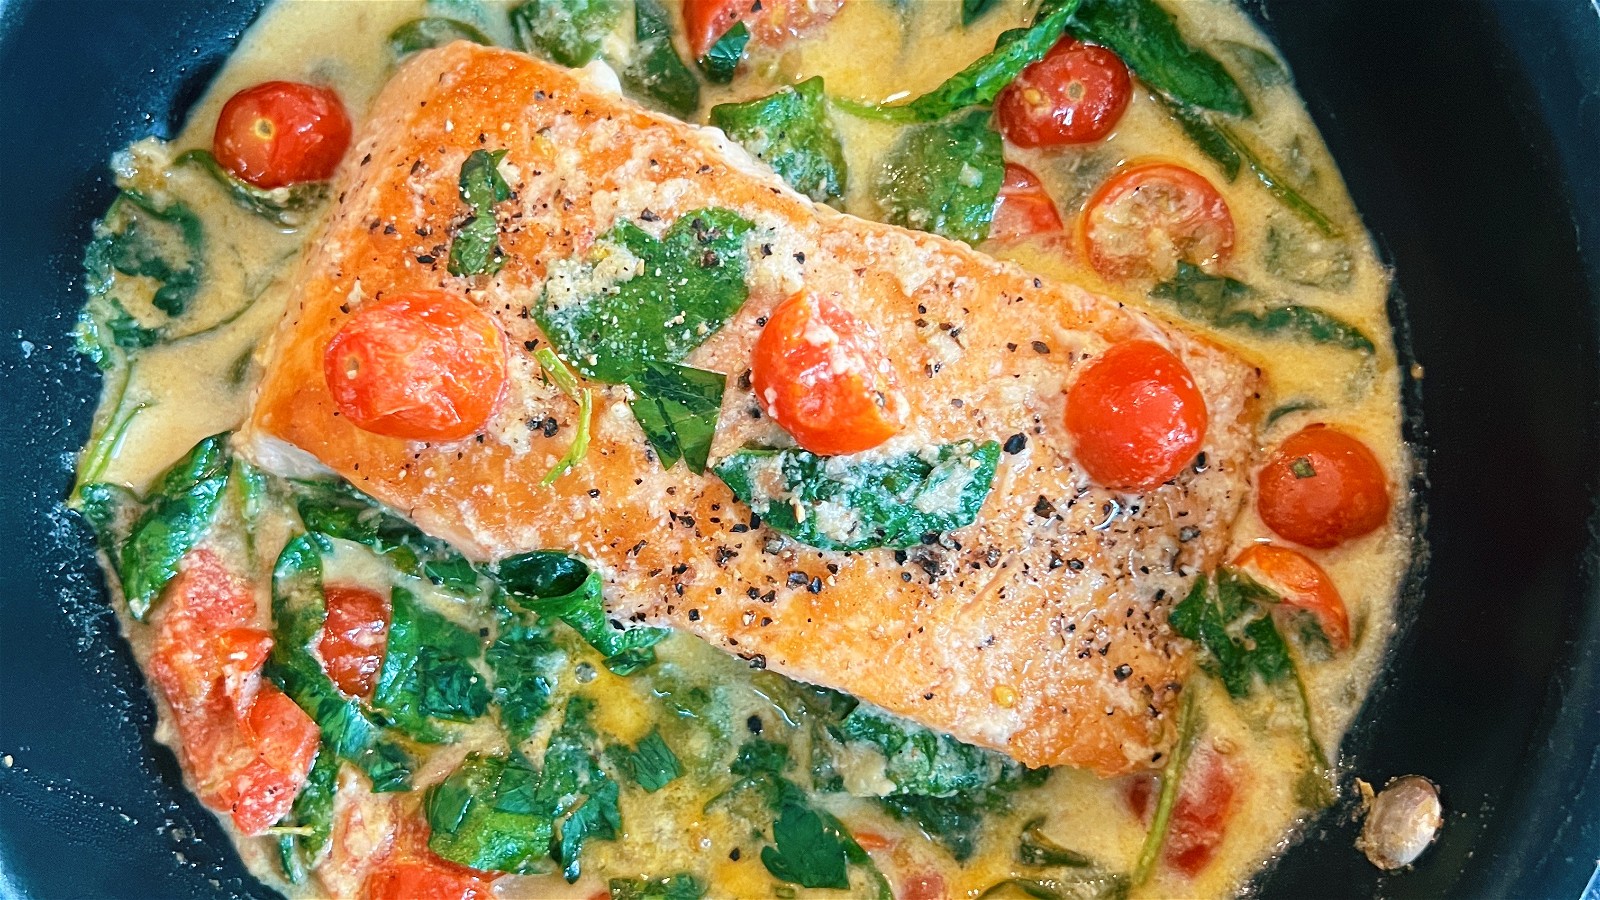 Image of One Skillet Creamy Tuscan Salmon